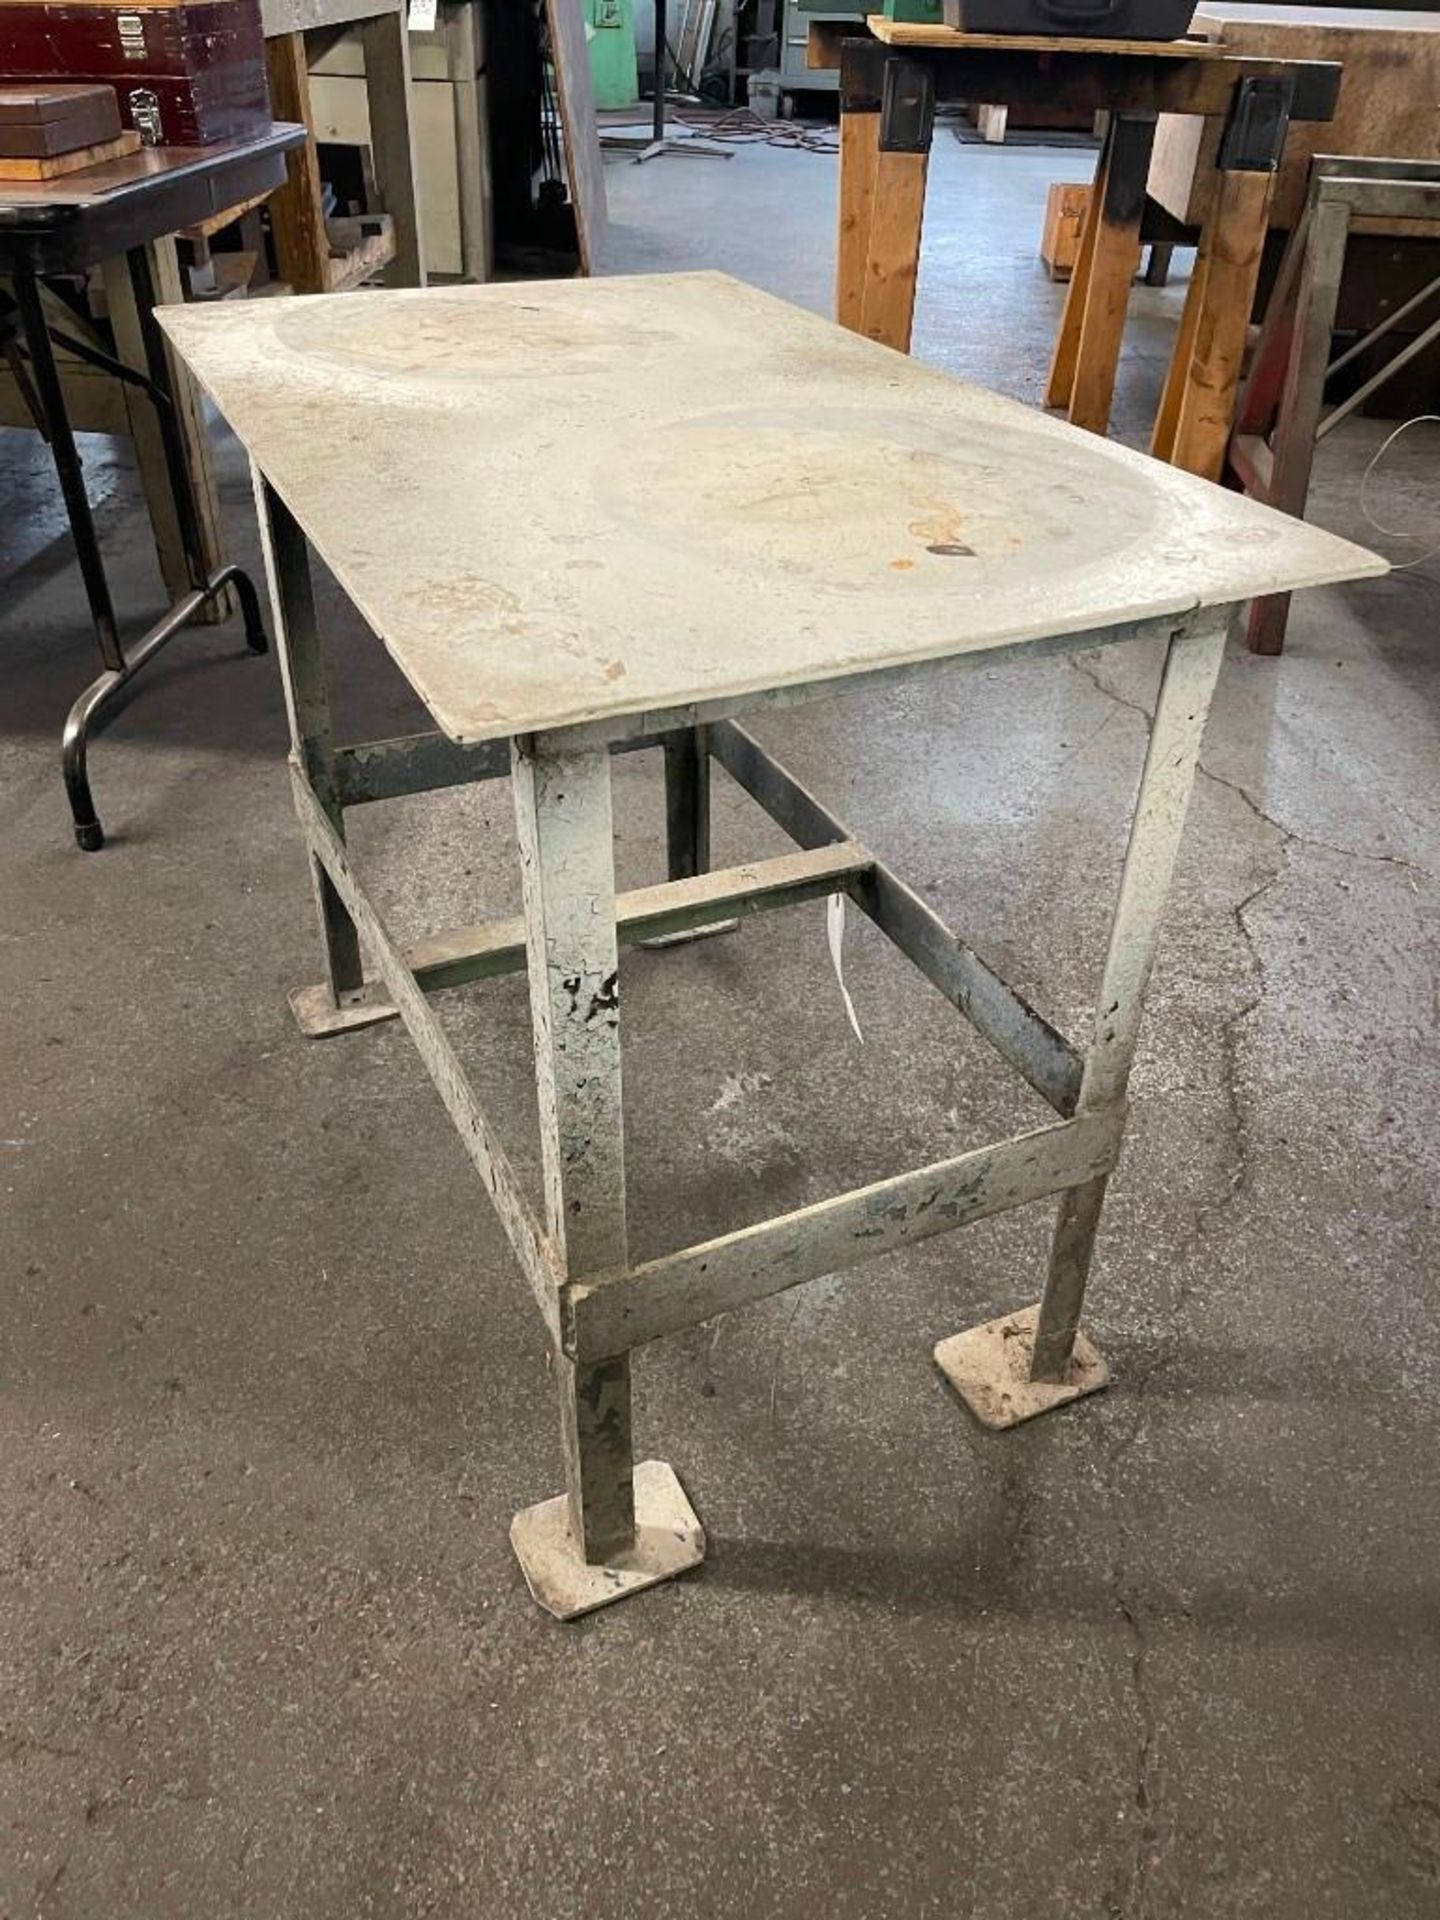 2' X 3' METAL SHOP TABLE - Image 2 of 4